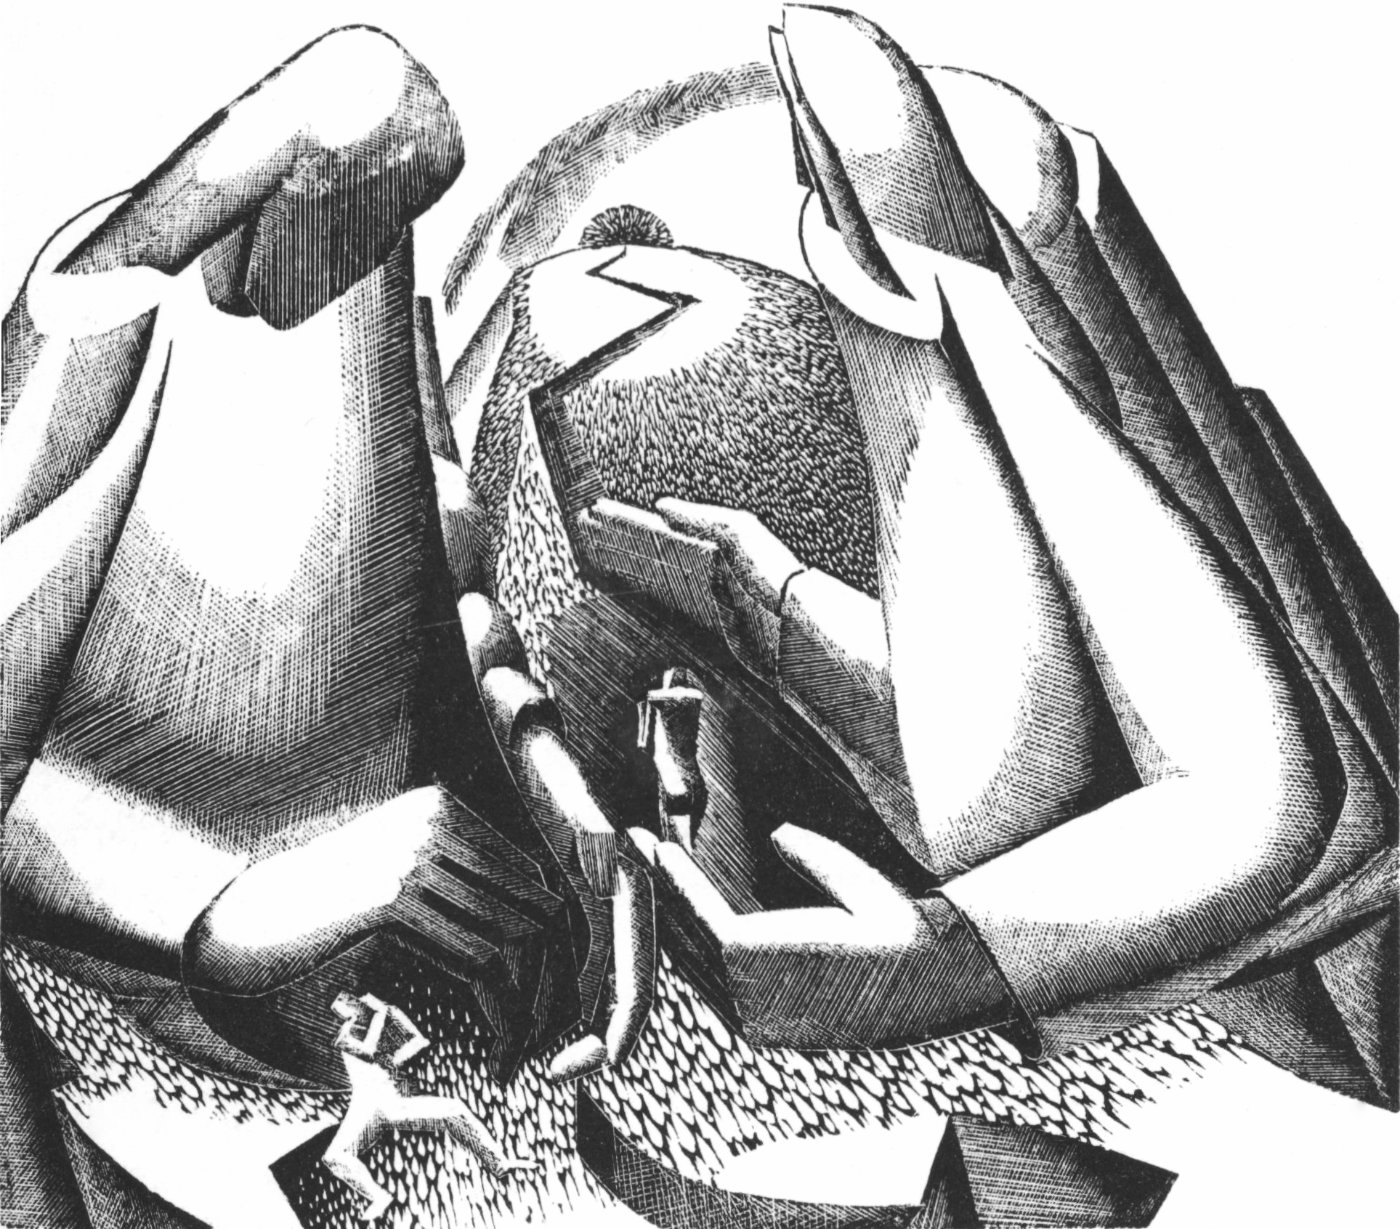 An abstract woodcut drawing of two oversized beings looking over a path, with one regular-sized person walking away on the path, and another regular-sized person sitting in front thinking.